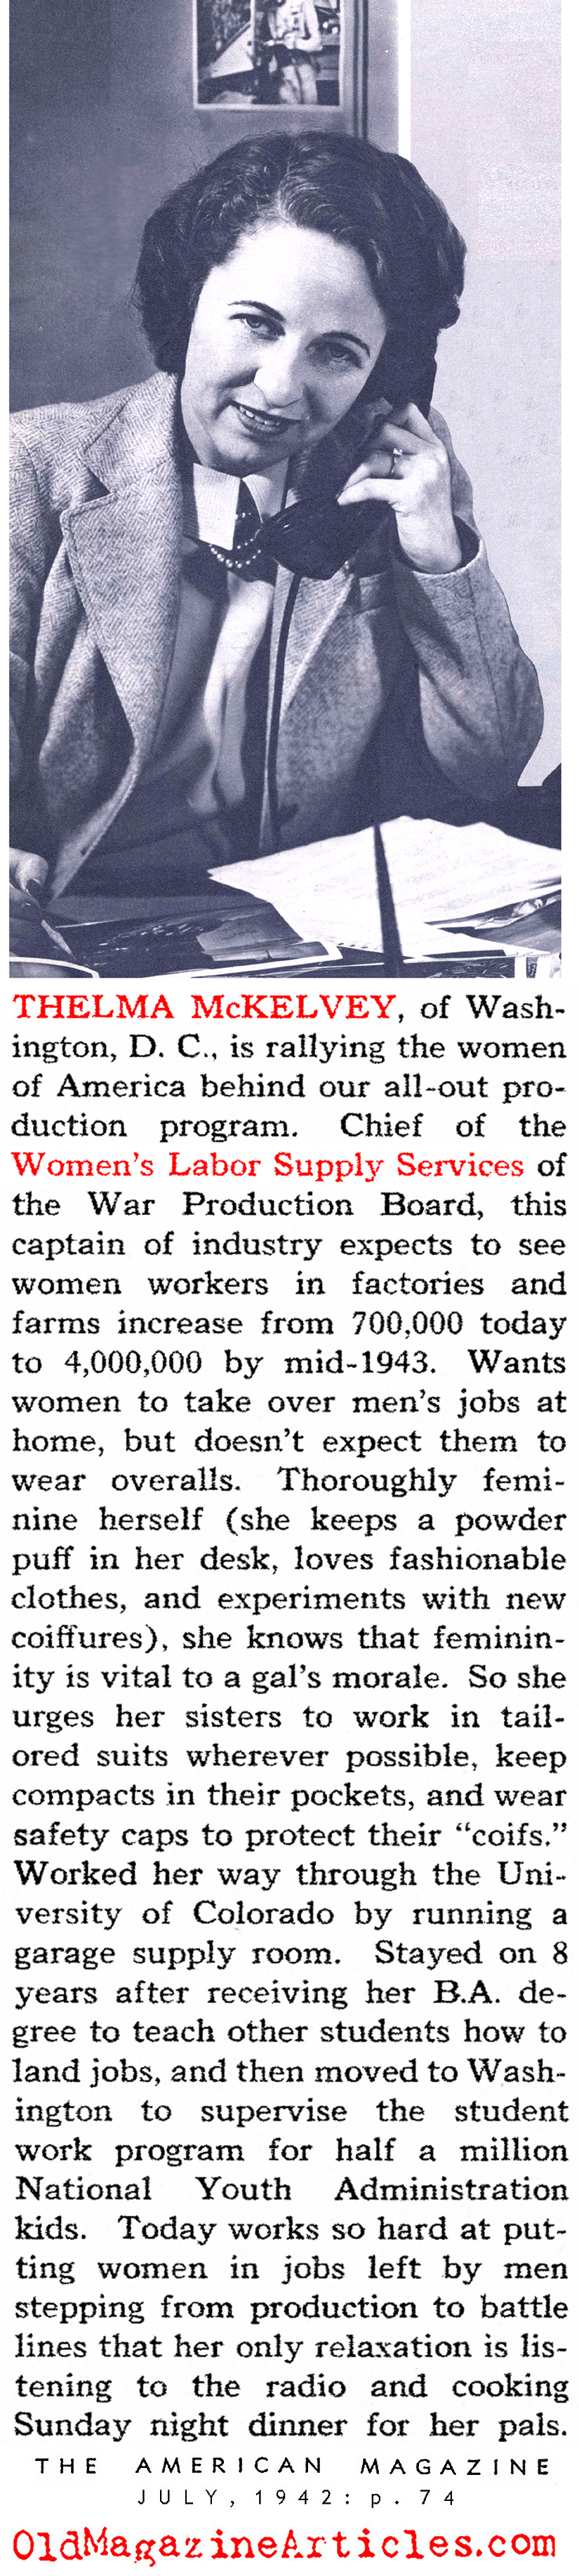 Distributing Women Throughout Industry (The American Magazine, 1942)